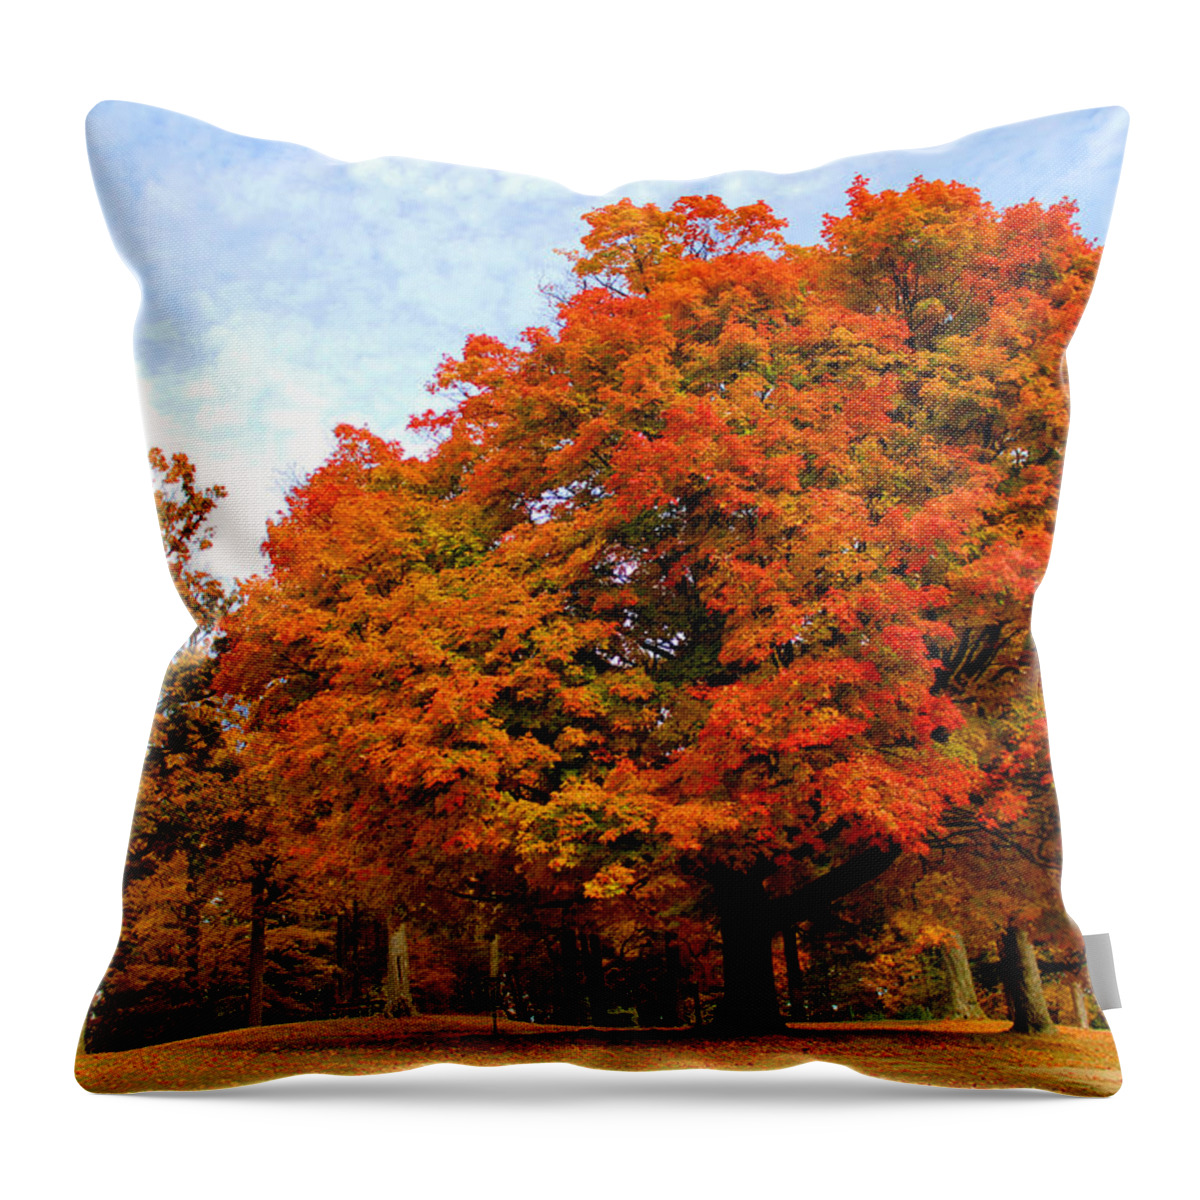 Autumn Throw Pillow featuring the photograph The Beauty of Autumn by Michael Rucker